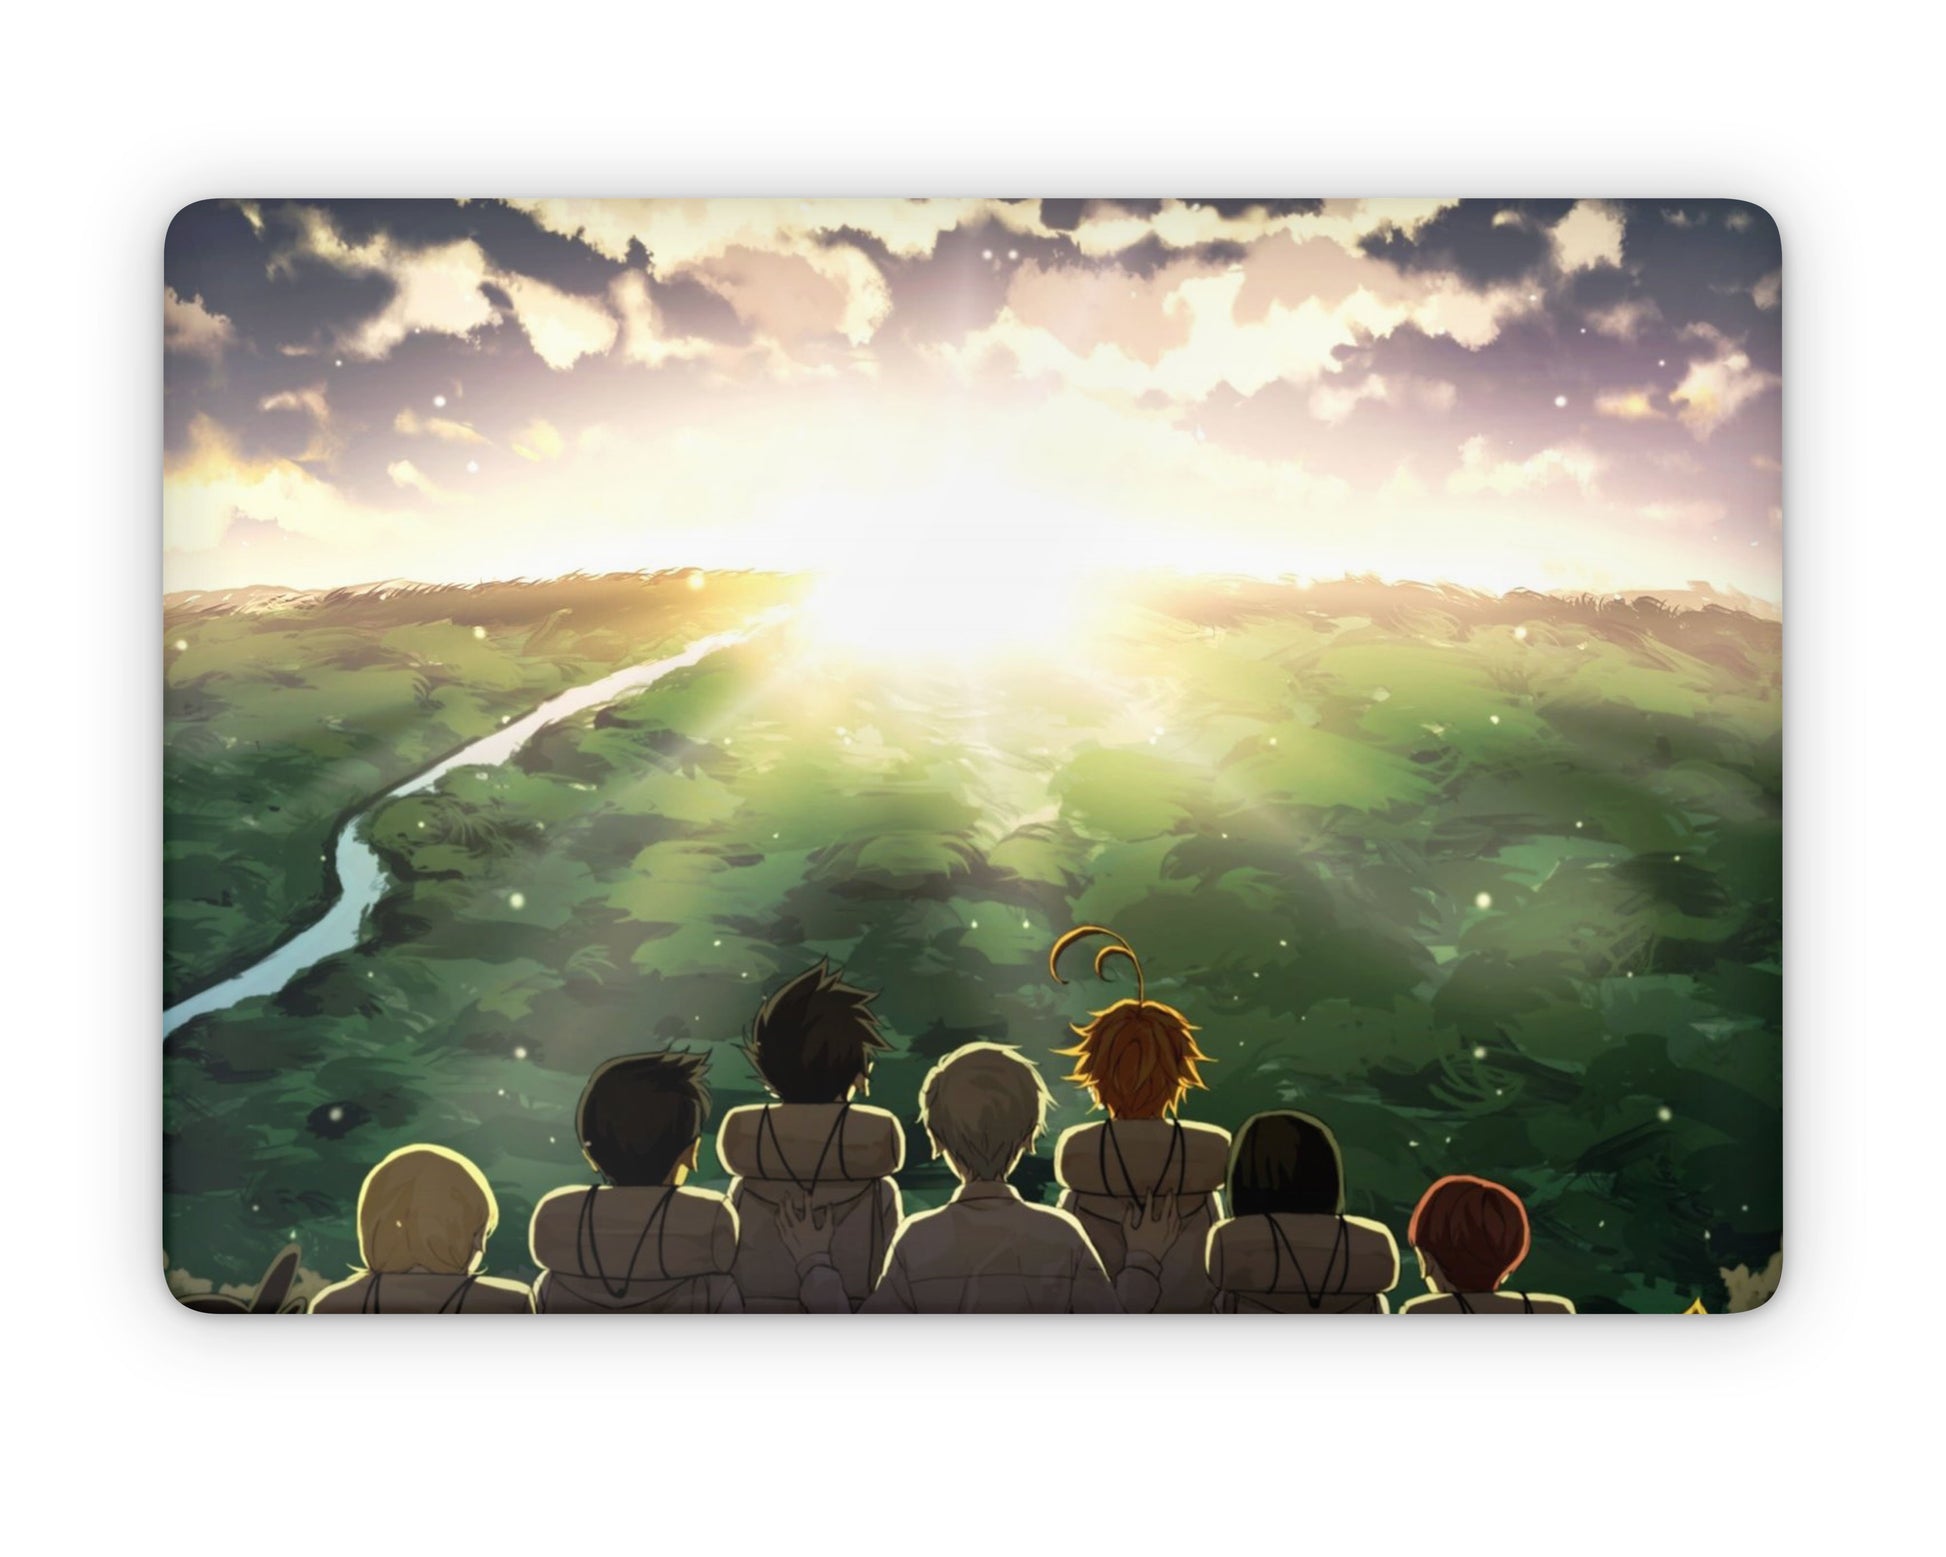 Anime Town Creations MacBook The Promised Neverland Sunrise Pro 16" (A2141) Skins - Anime The Promised Neverland Skin